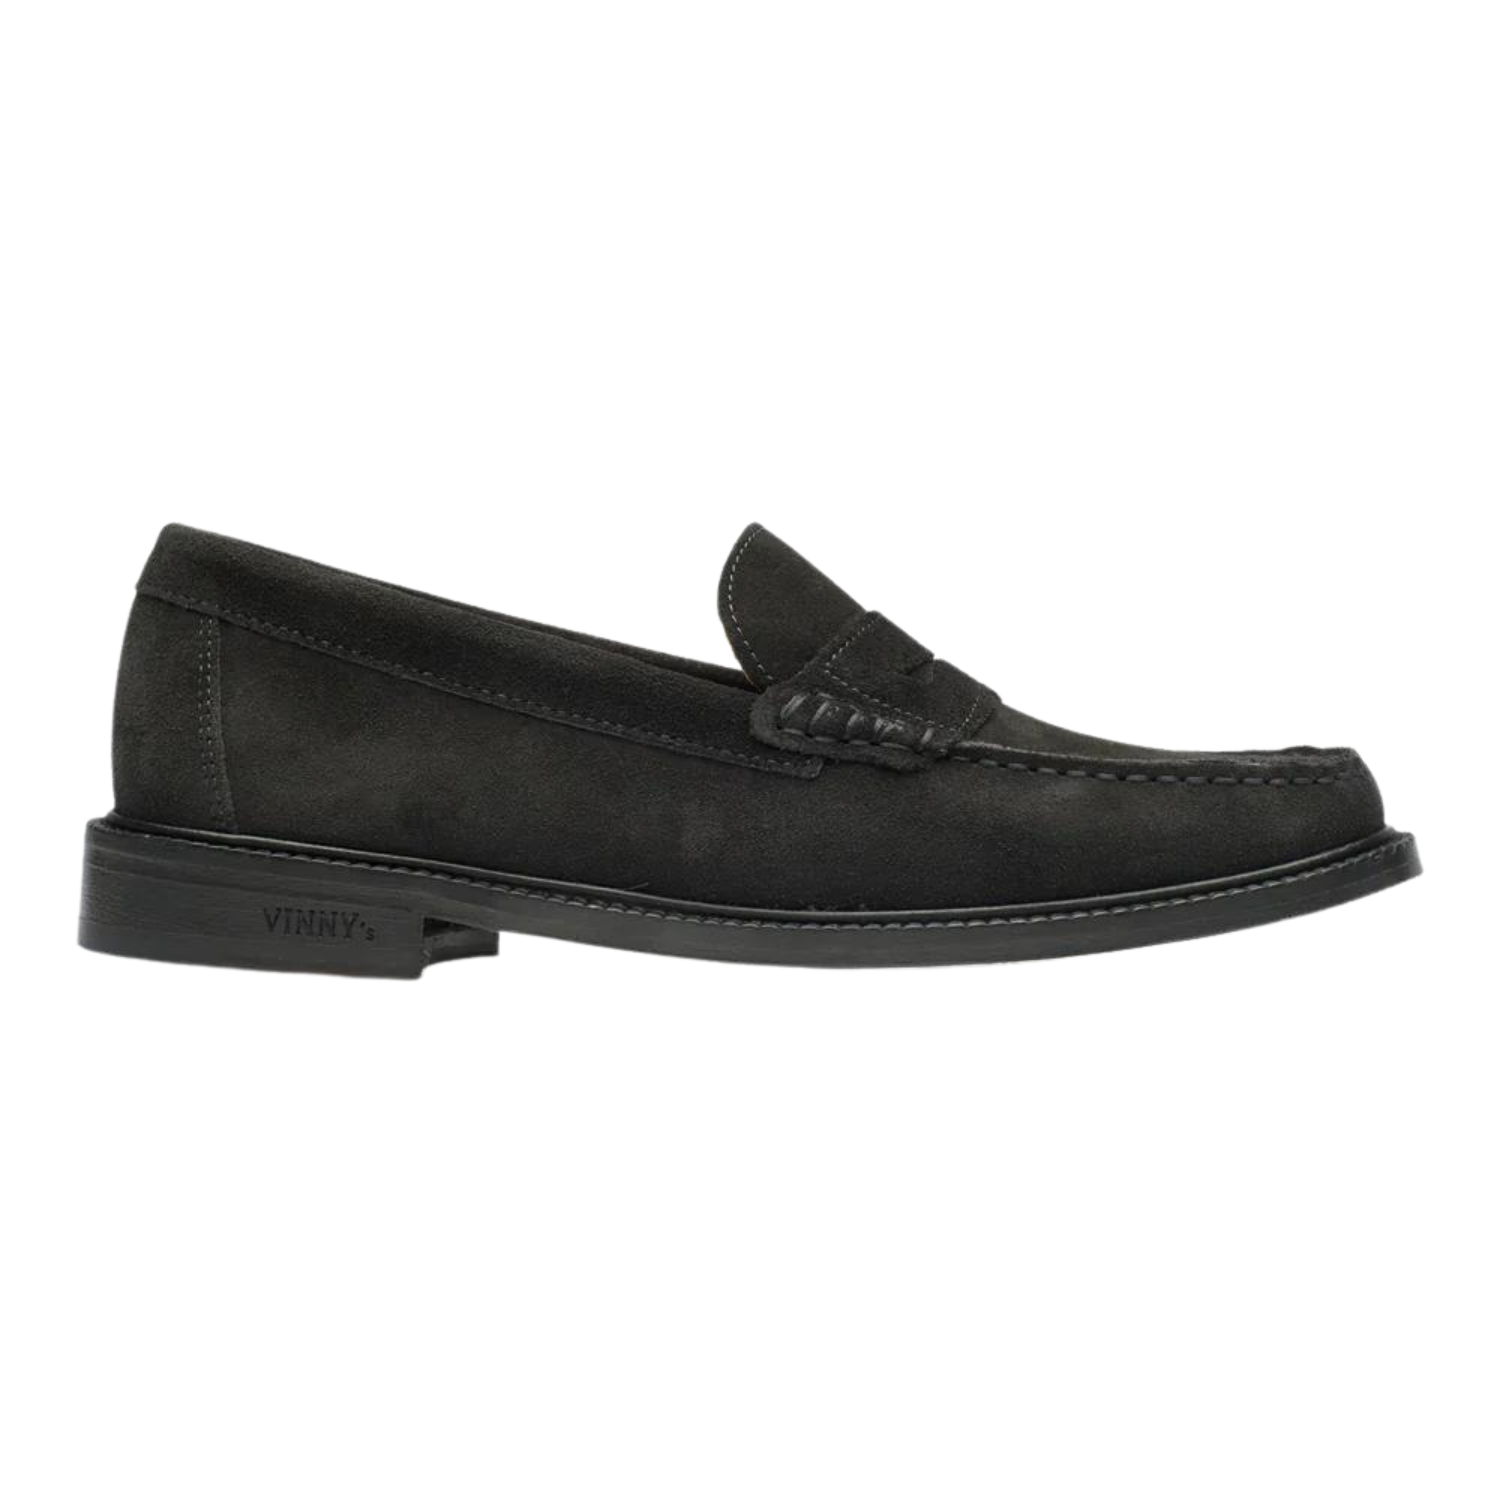 YARDEE MOCCASIN LOAFER